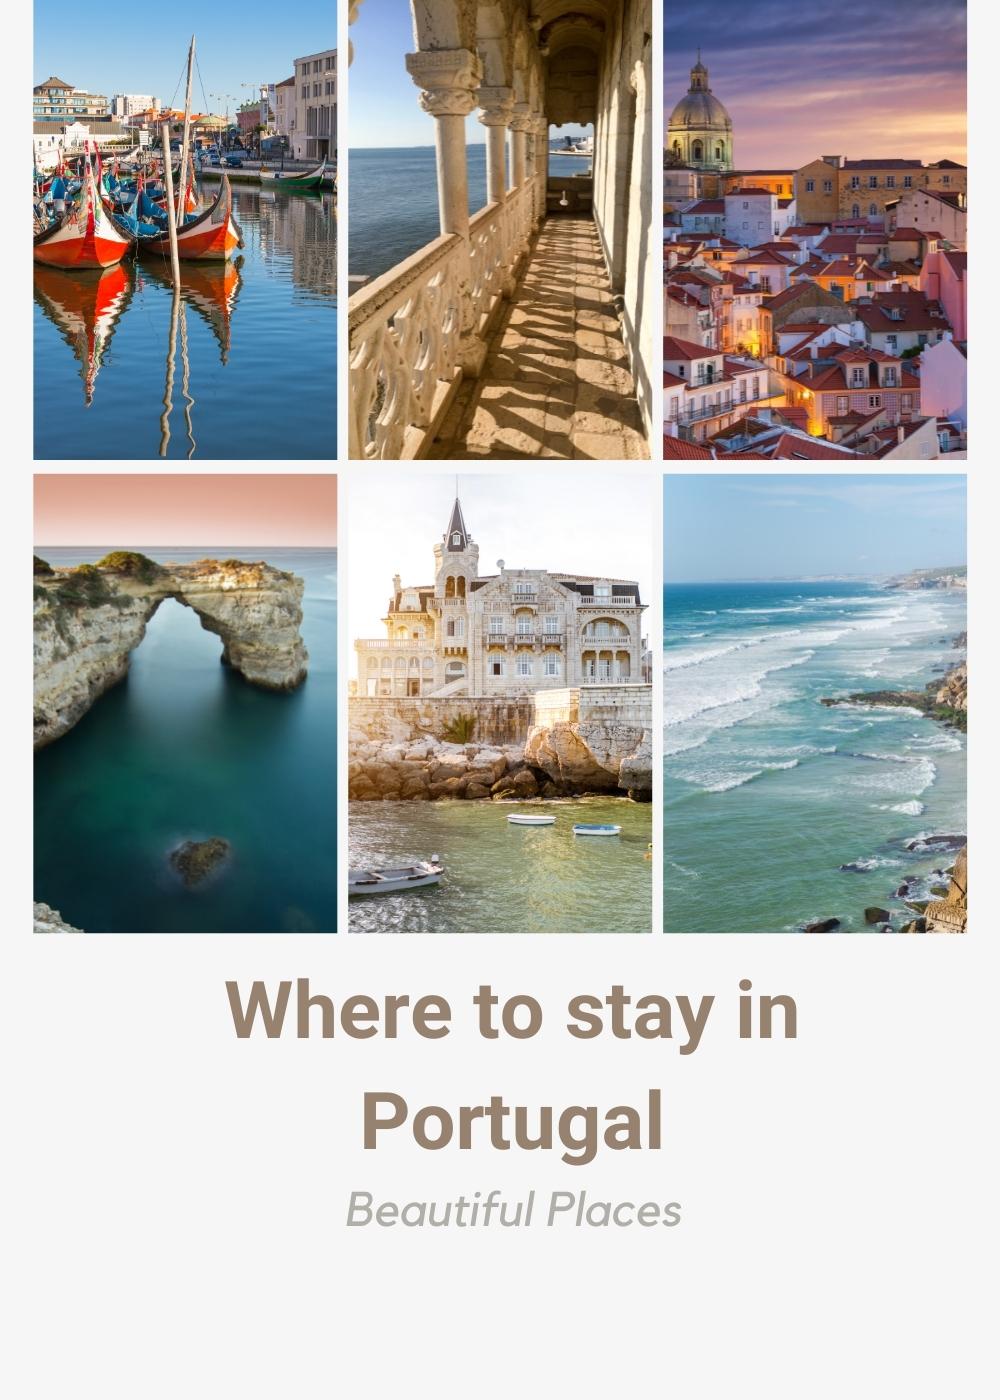 Beautiful places to stay in Portugal